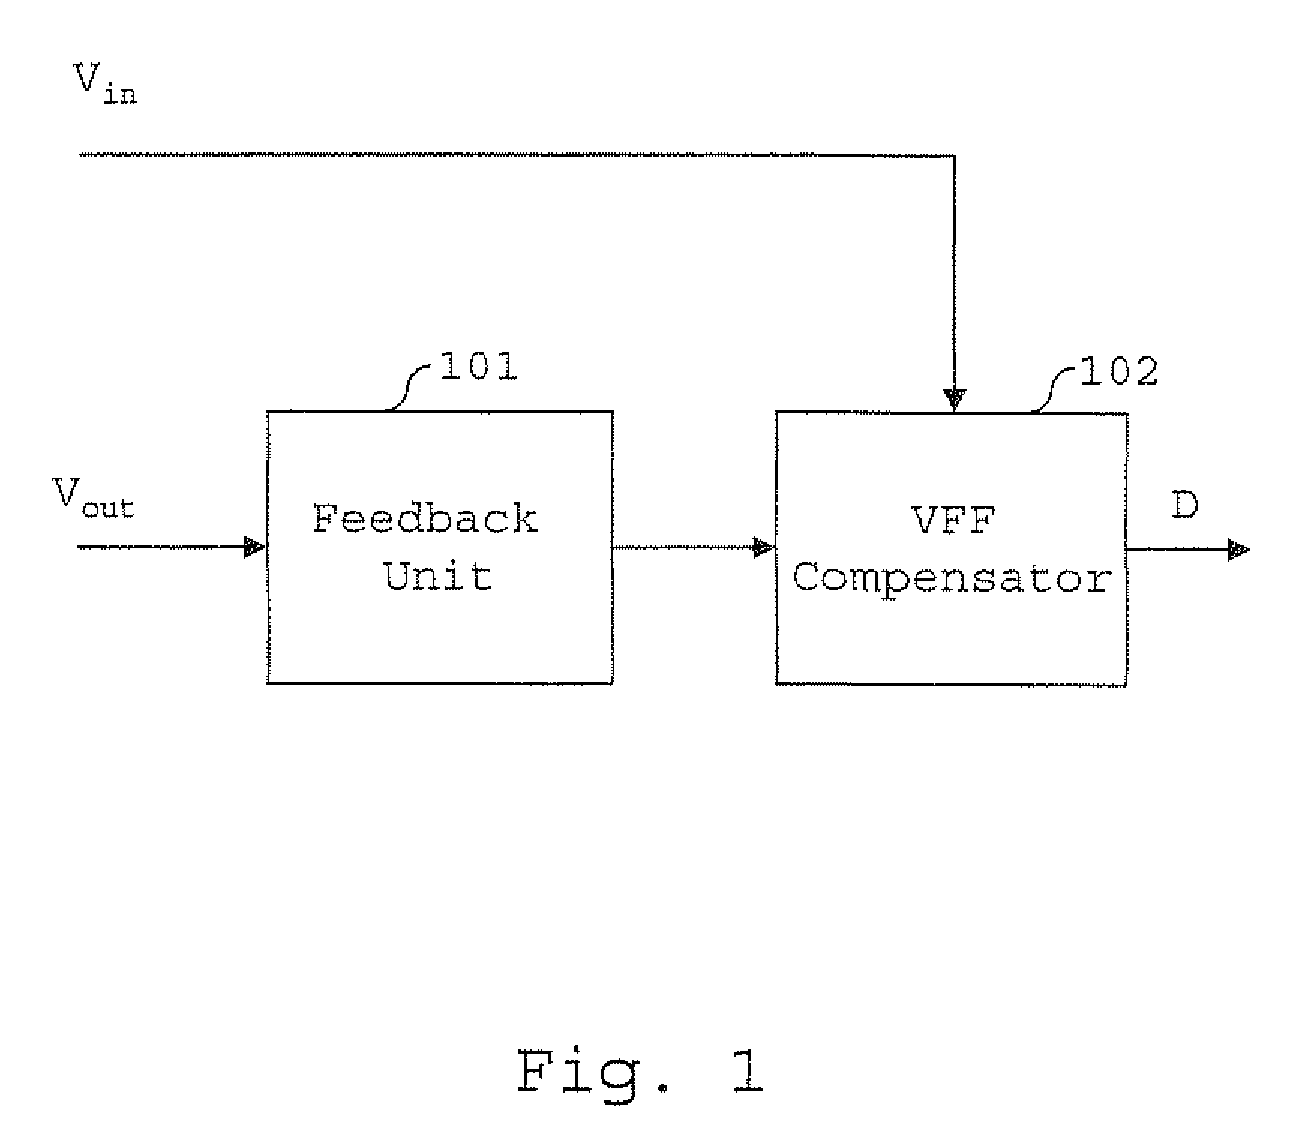 Digital control unit having a transient detector for controlling a switched mode power supply